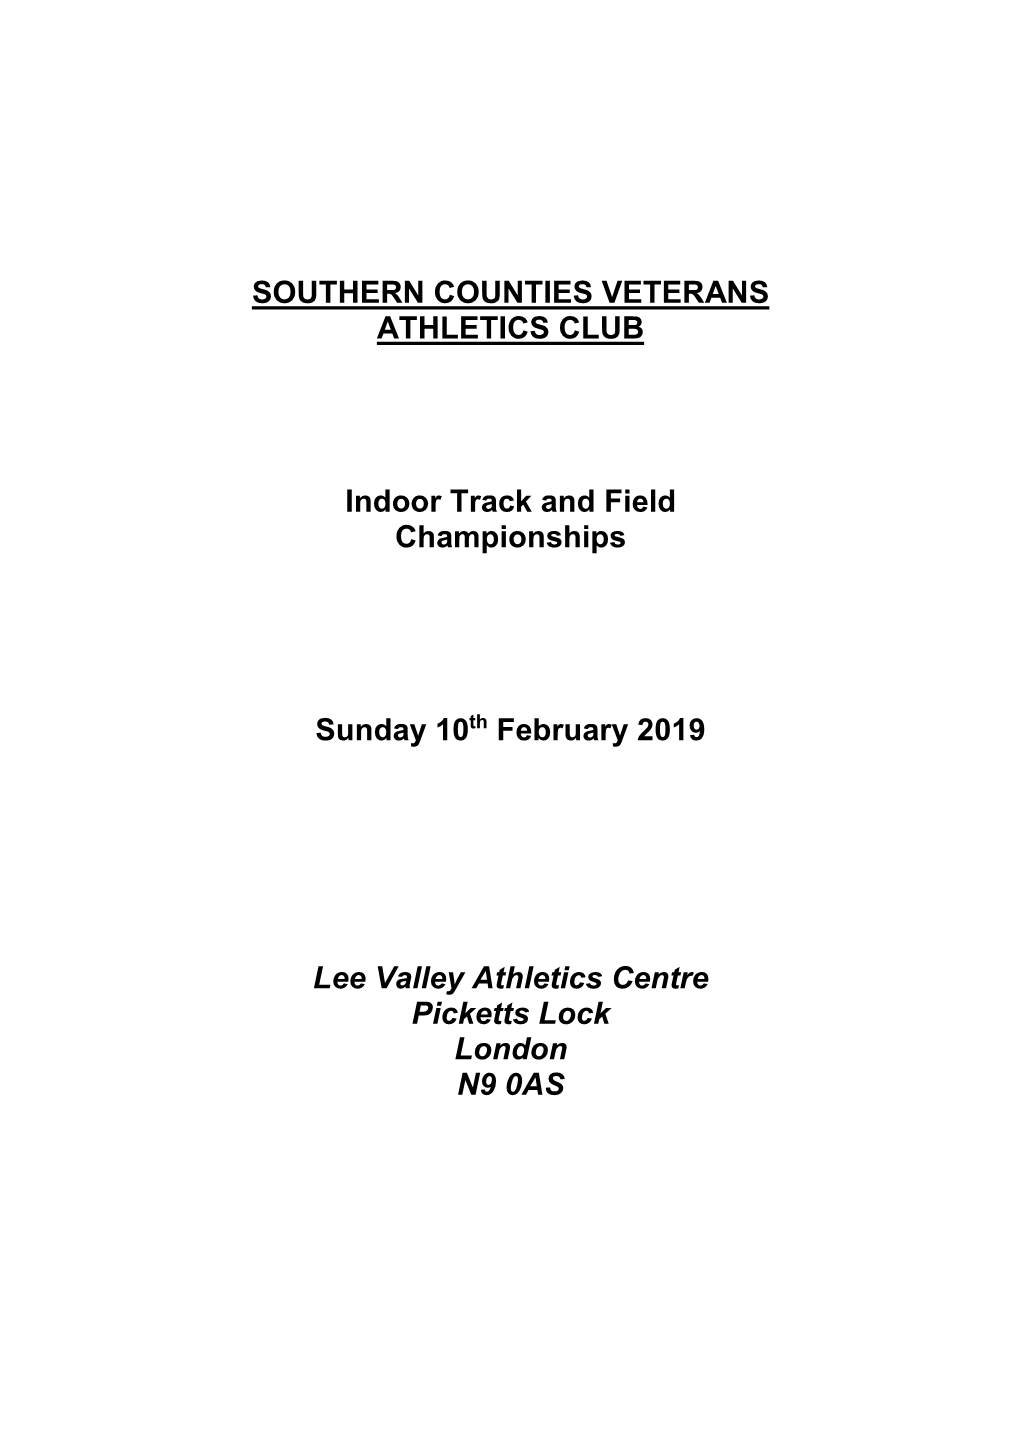 SOUTHERN COUNTIES VETERANS ATHLETICS CLUB Indoor Track